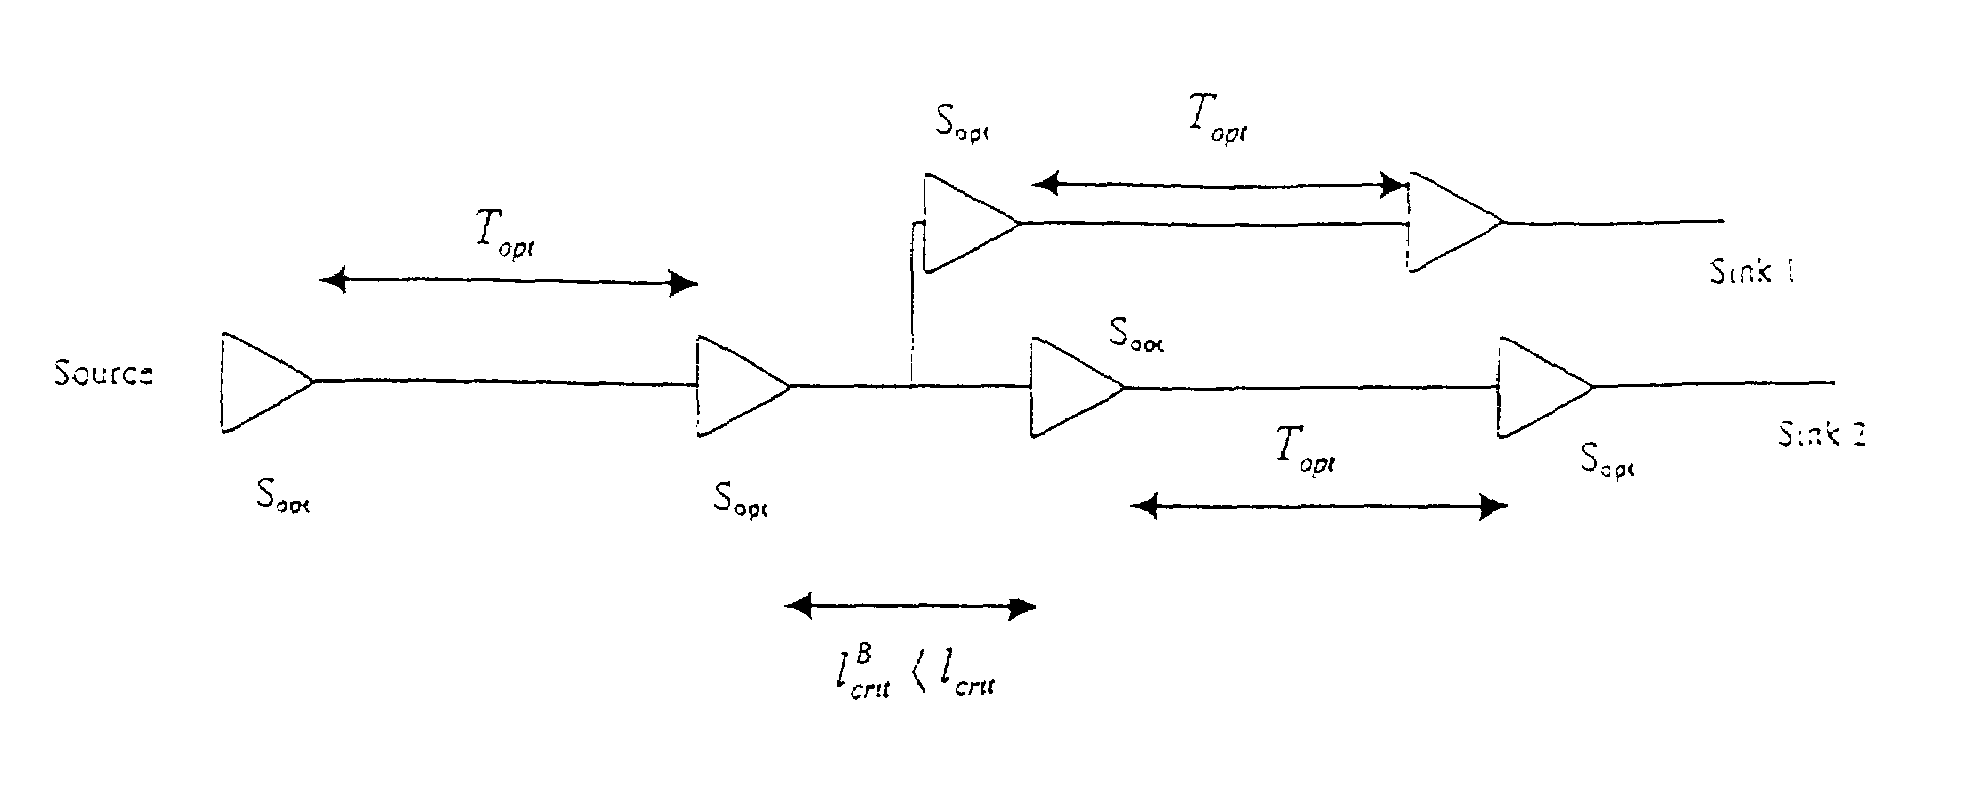 Insertion of repeaters without timing constraints